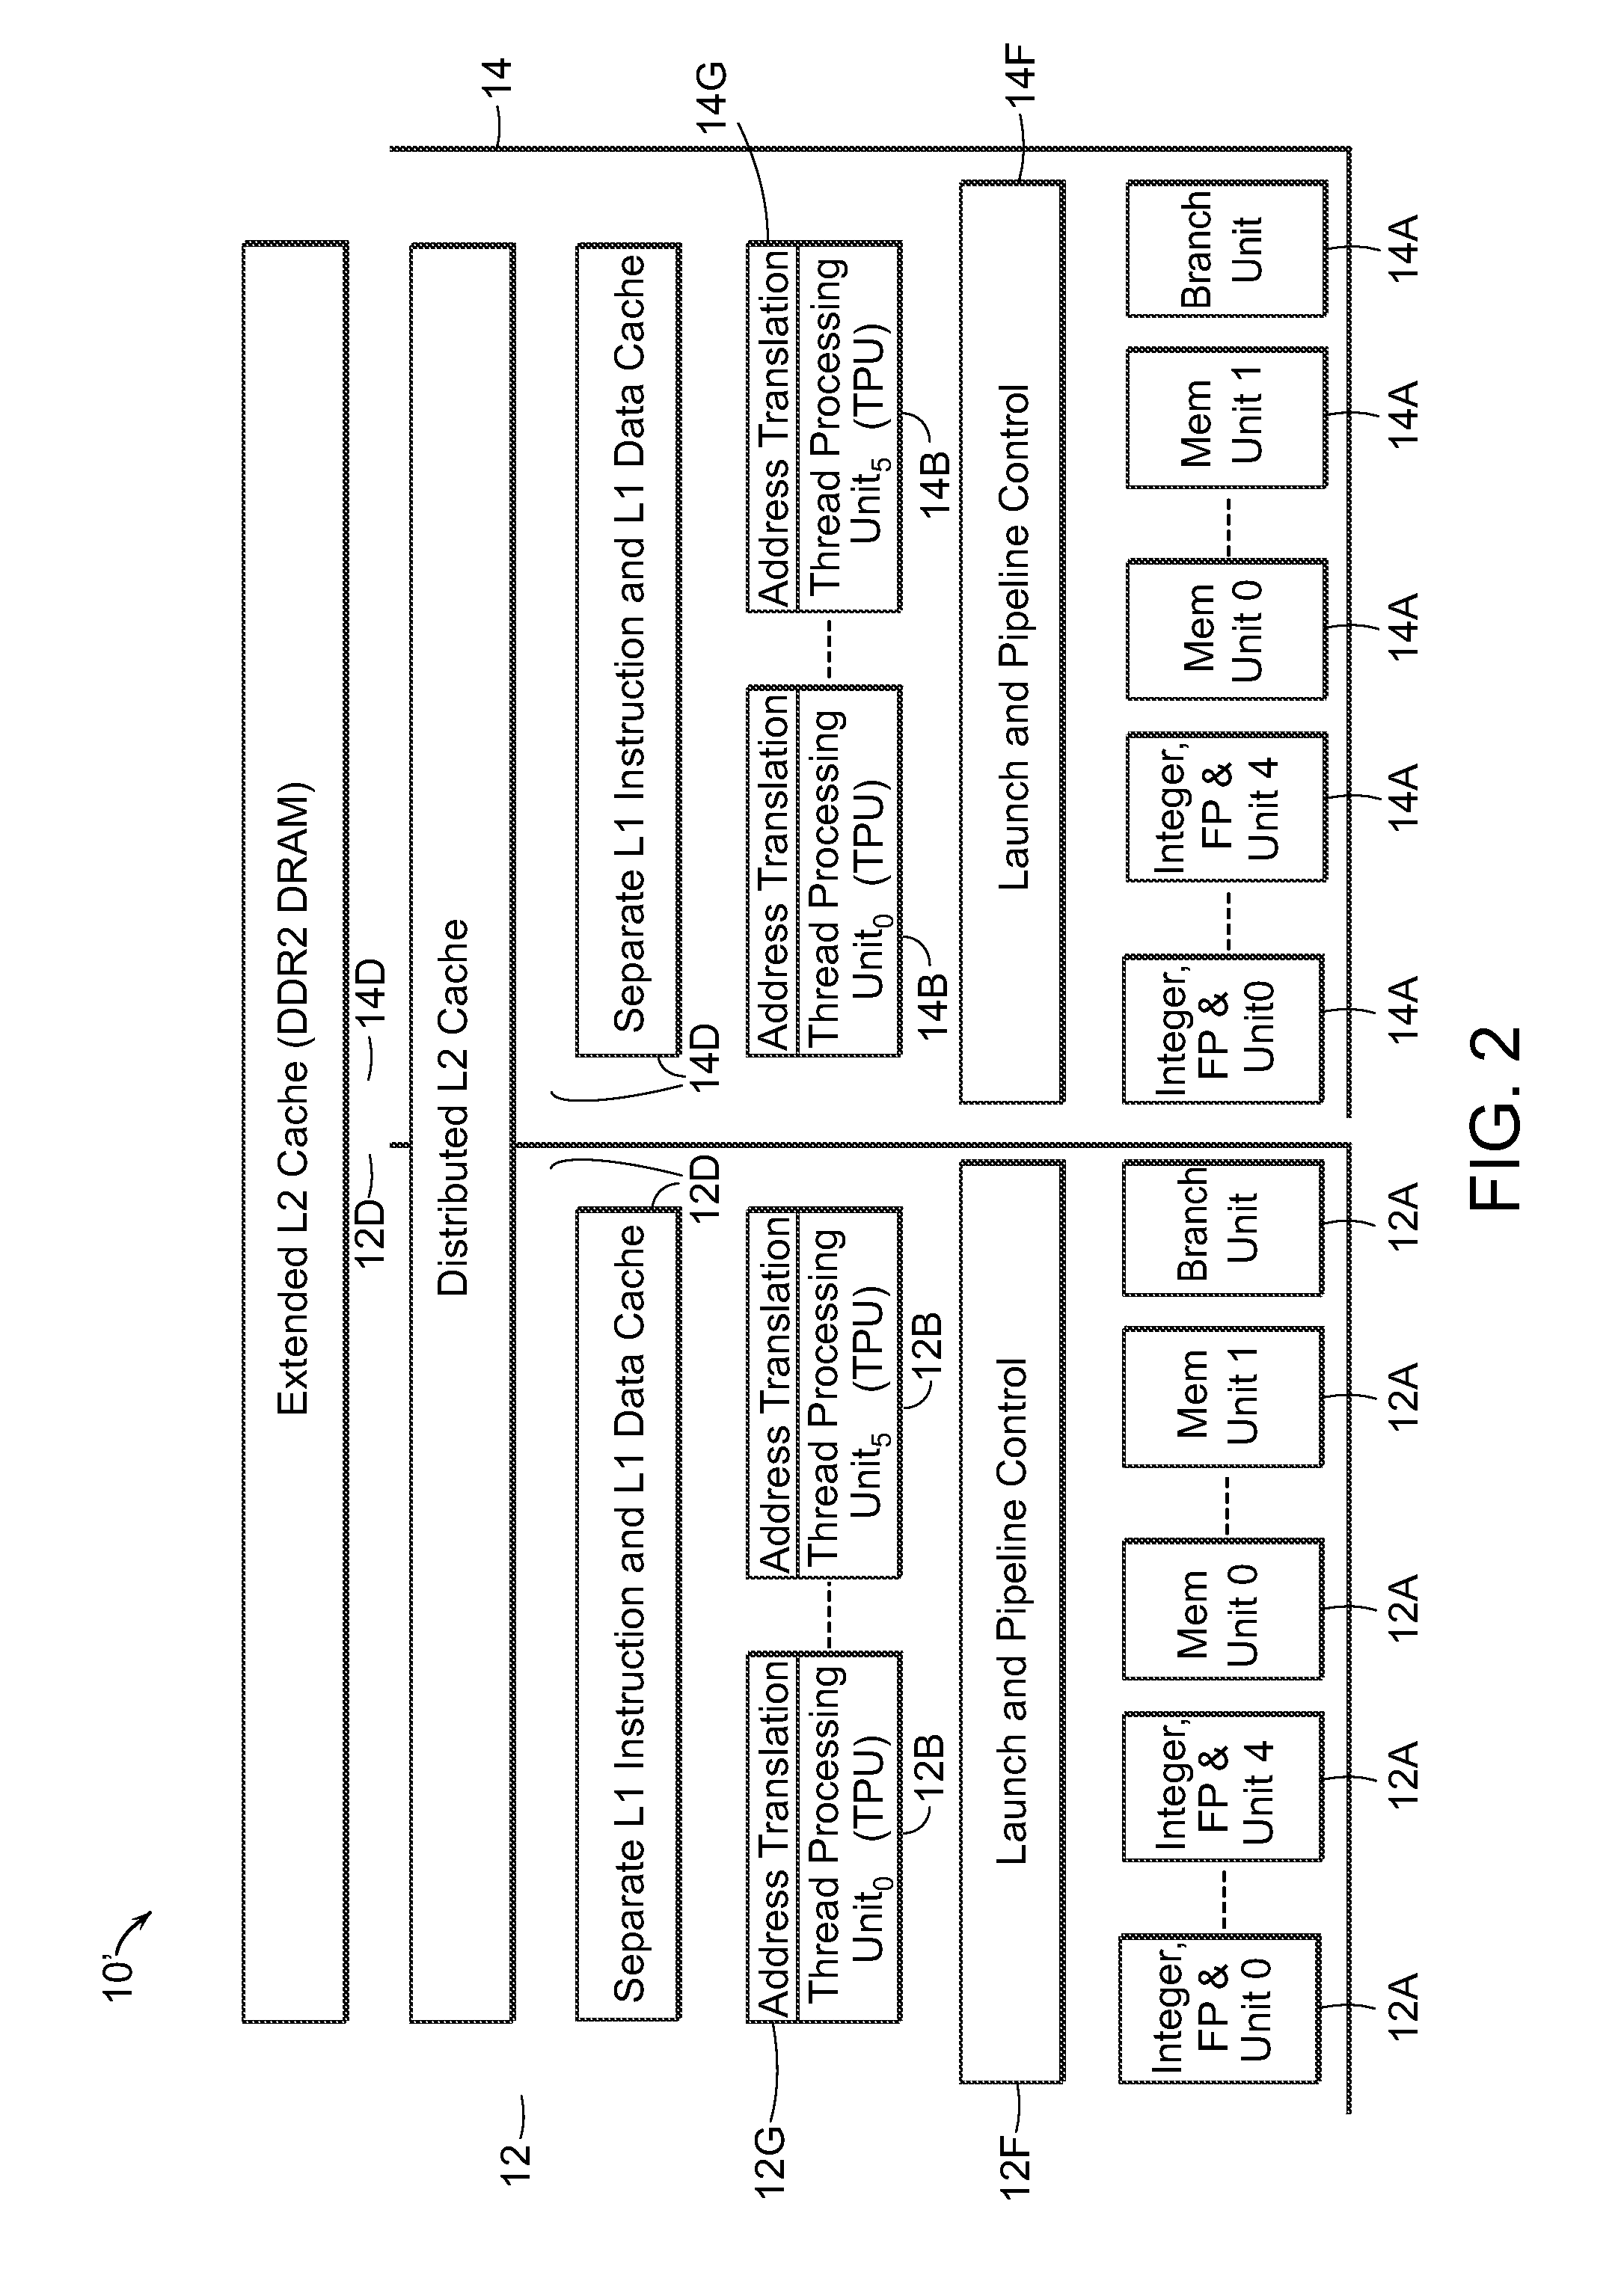 General Purpose Digital Data Processor, Systems and Methods